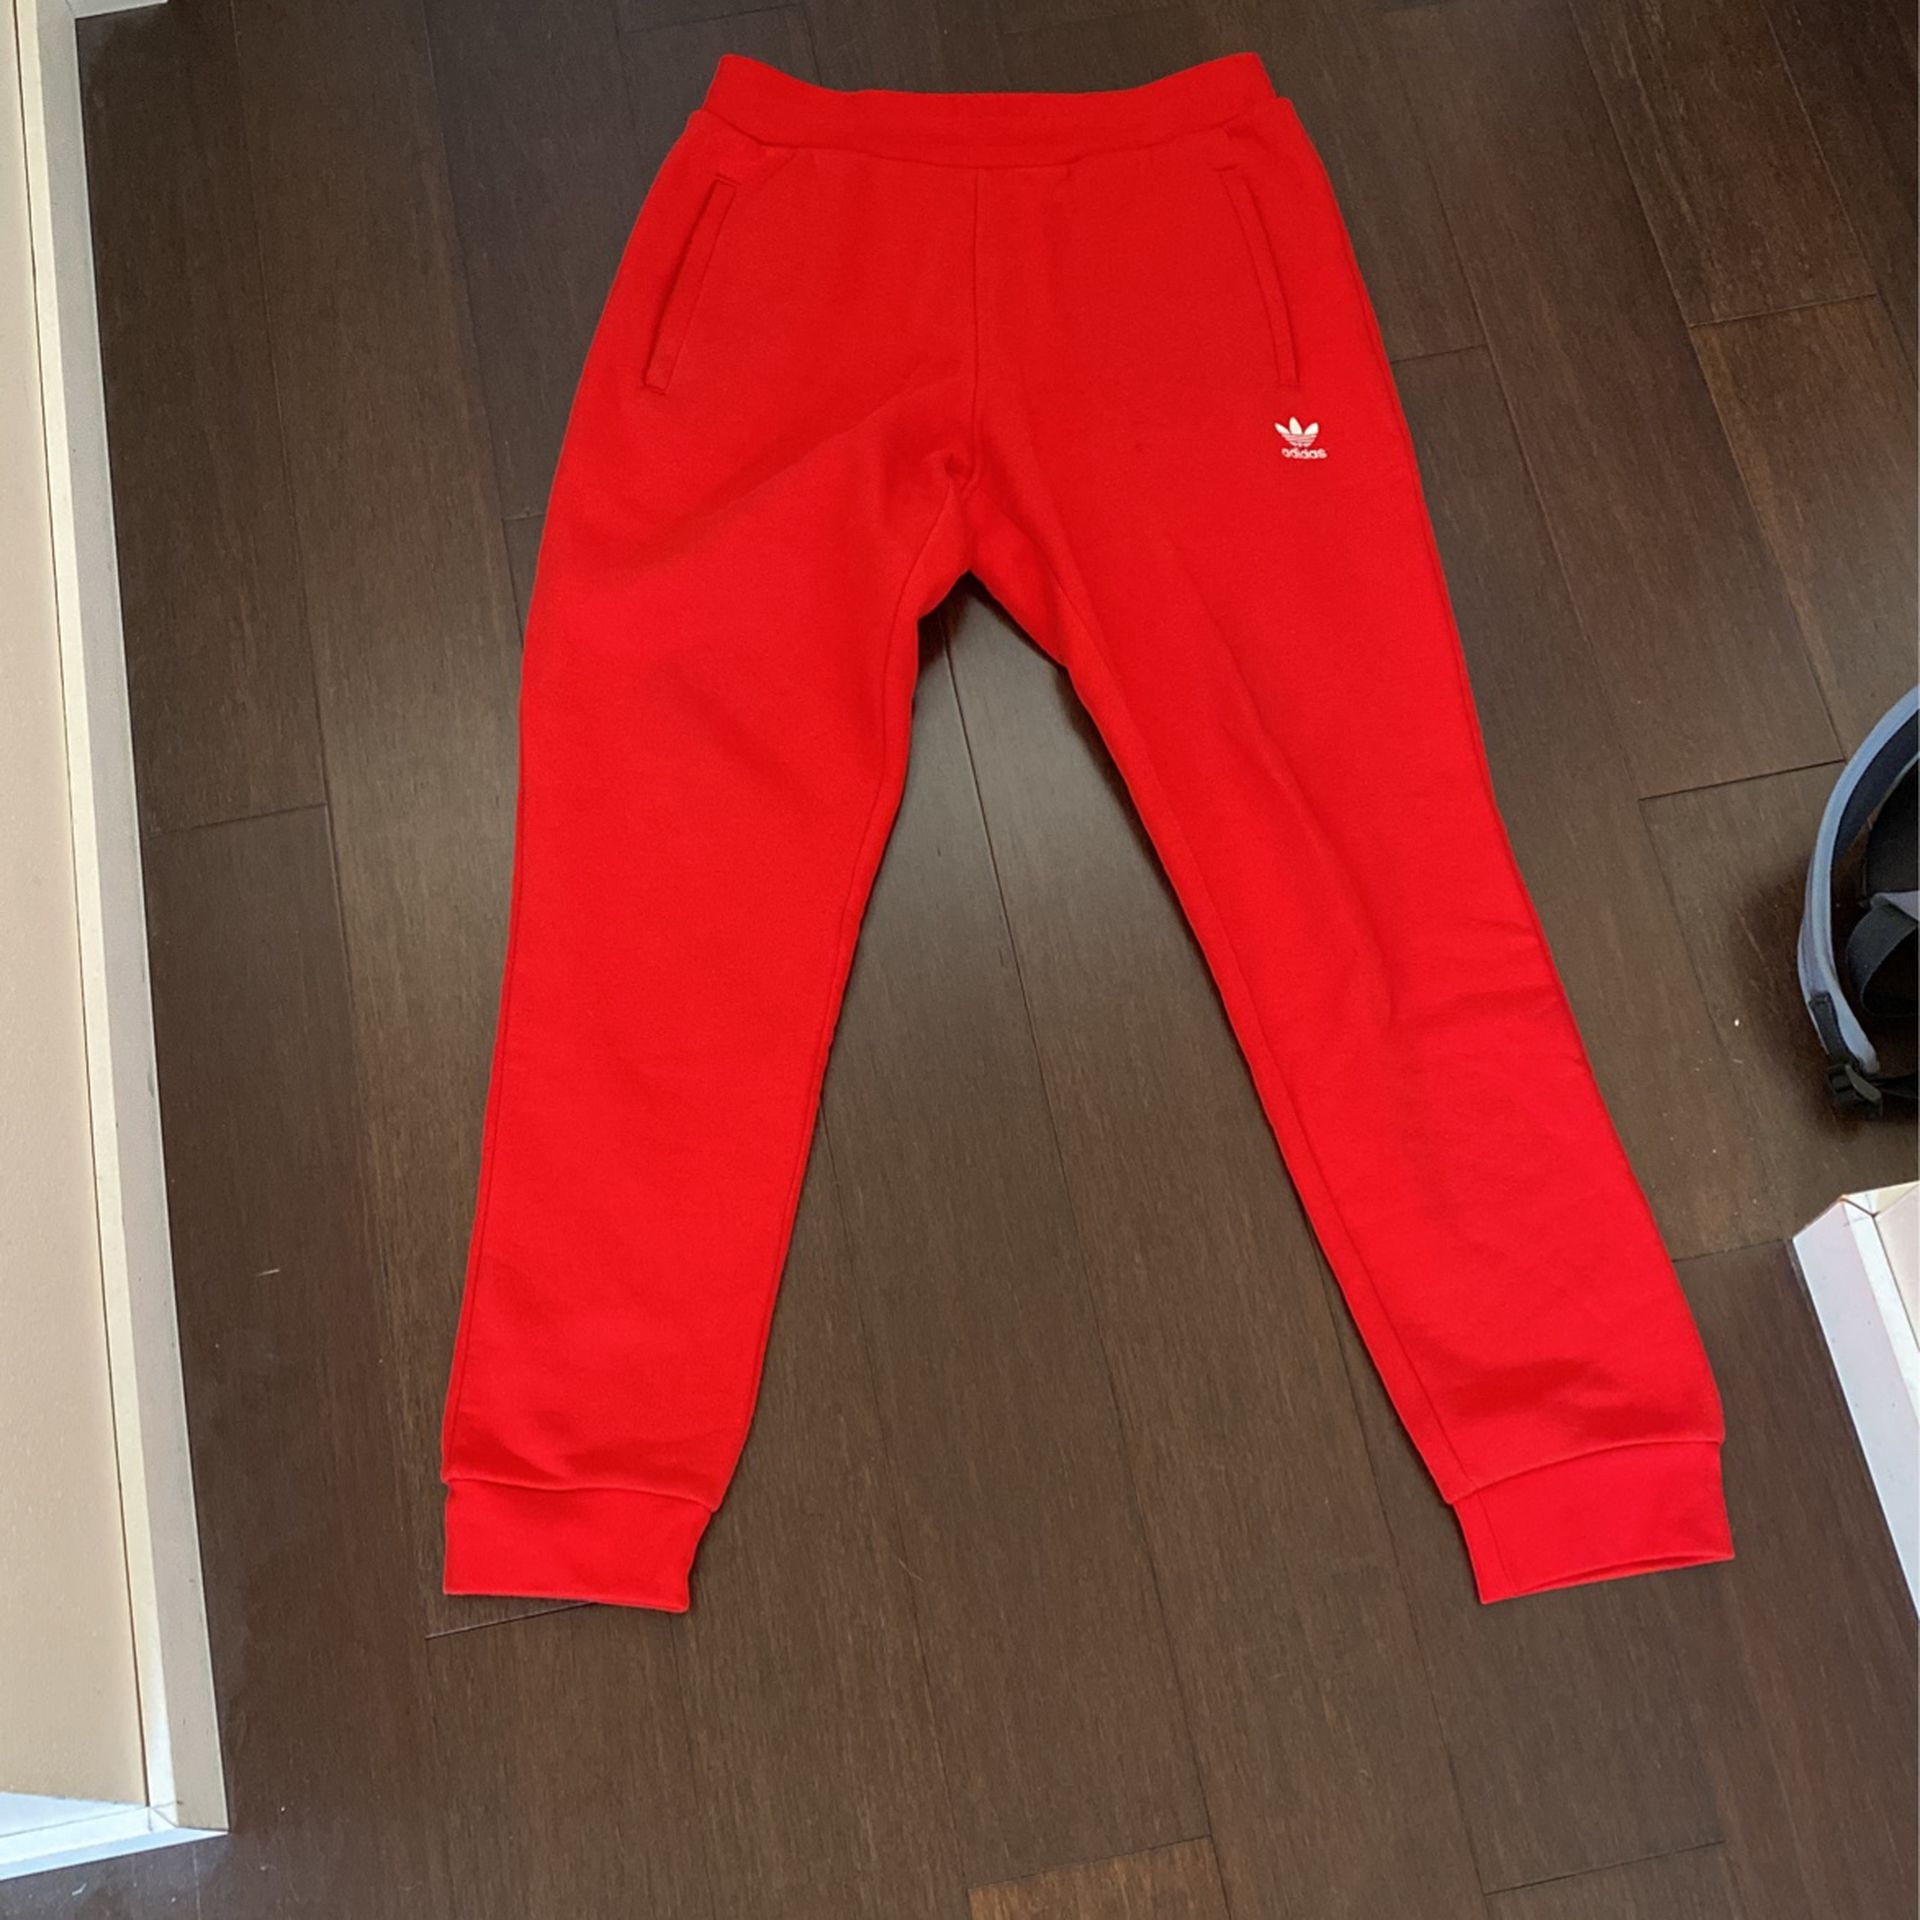 RED ADIDAS JOGGERS 